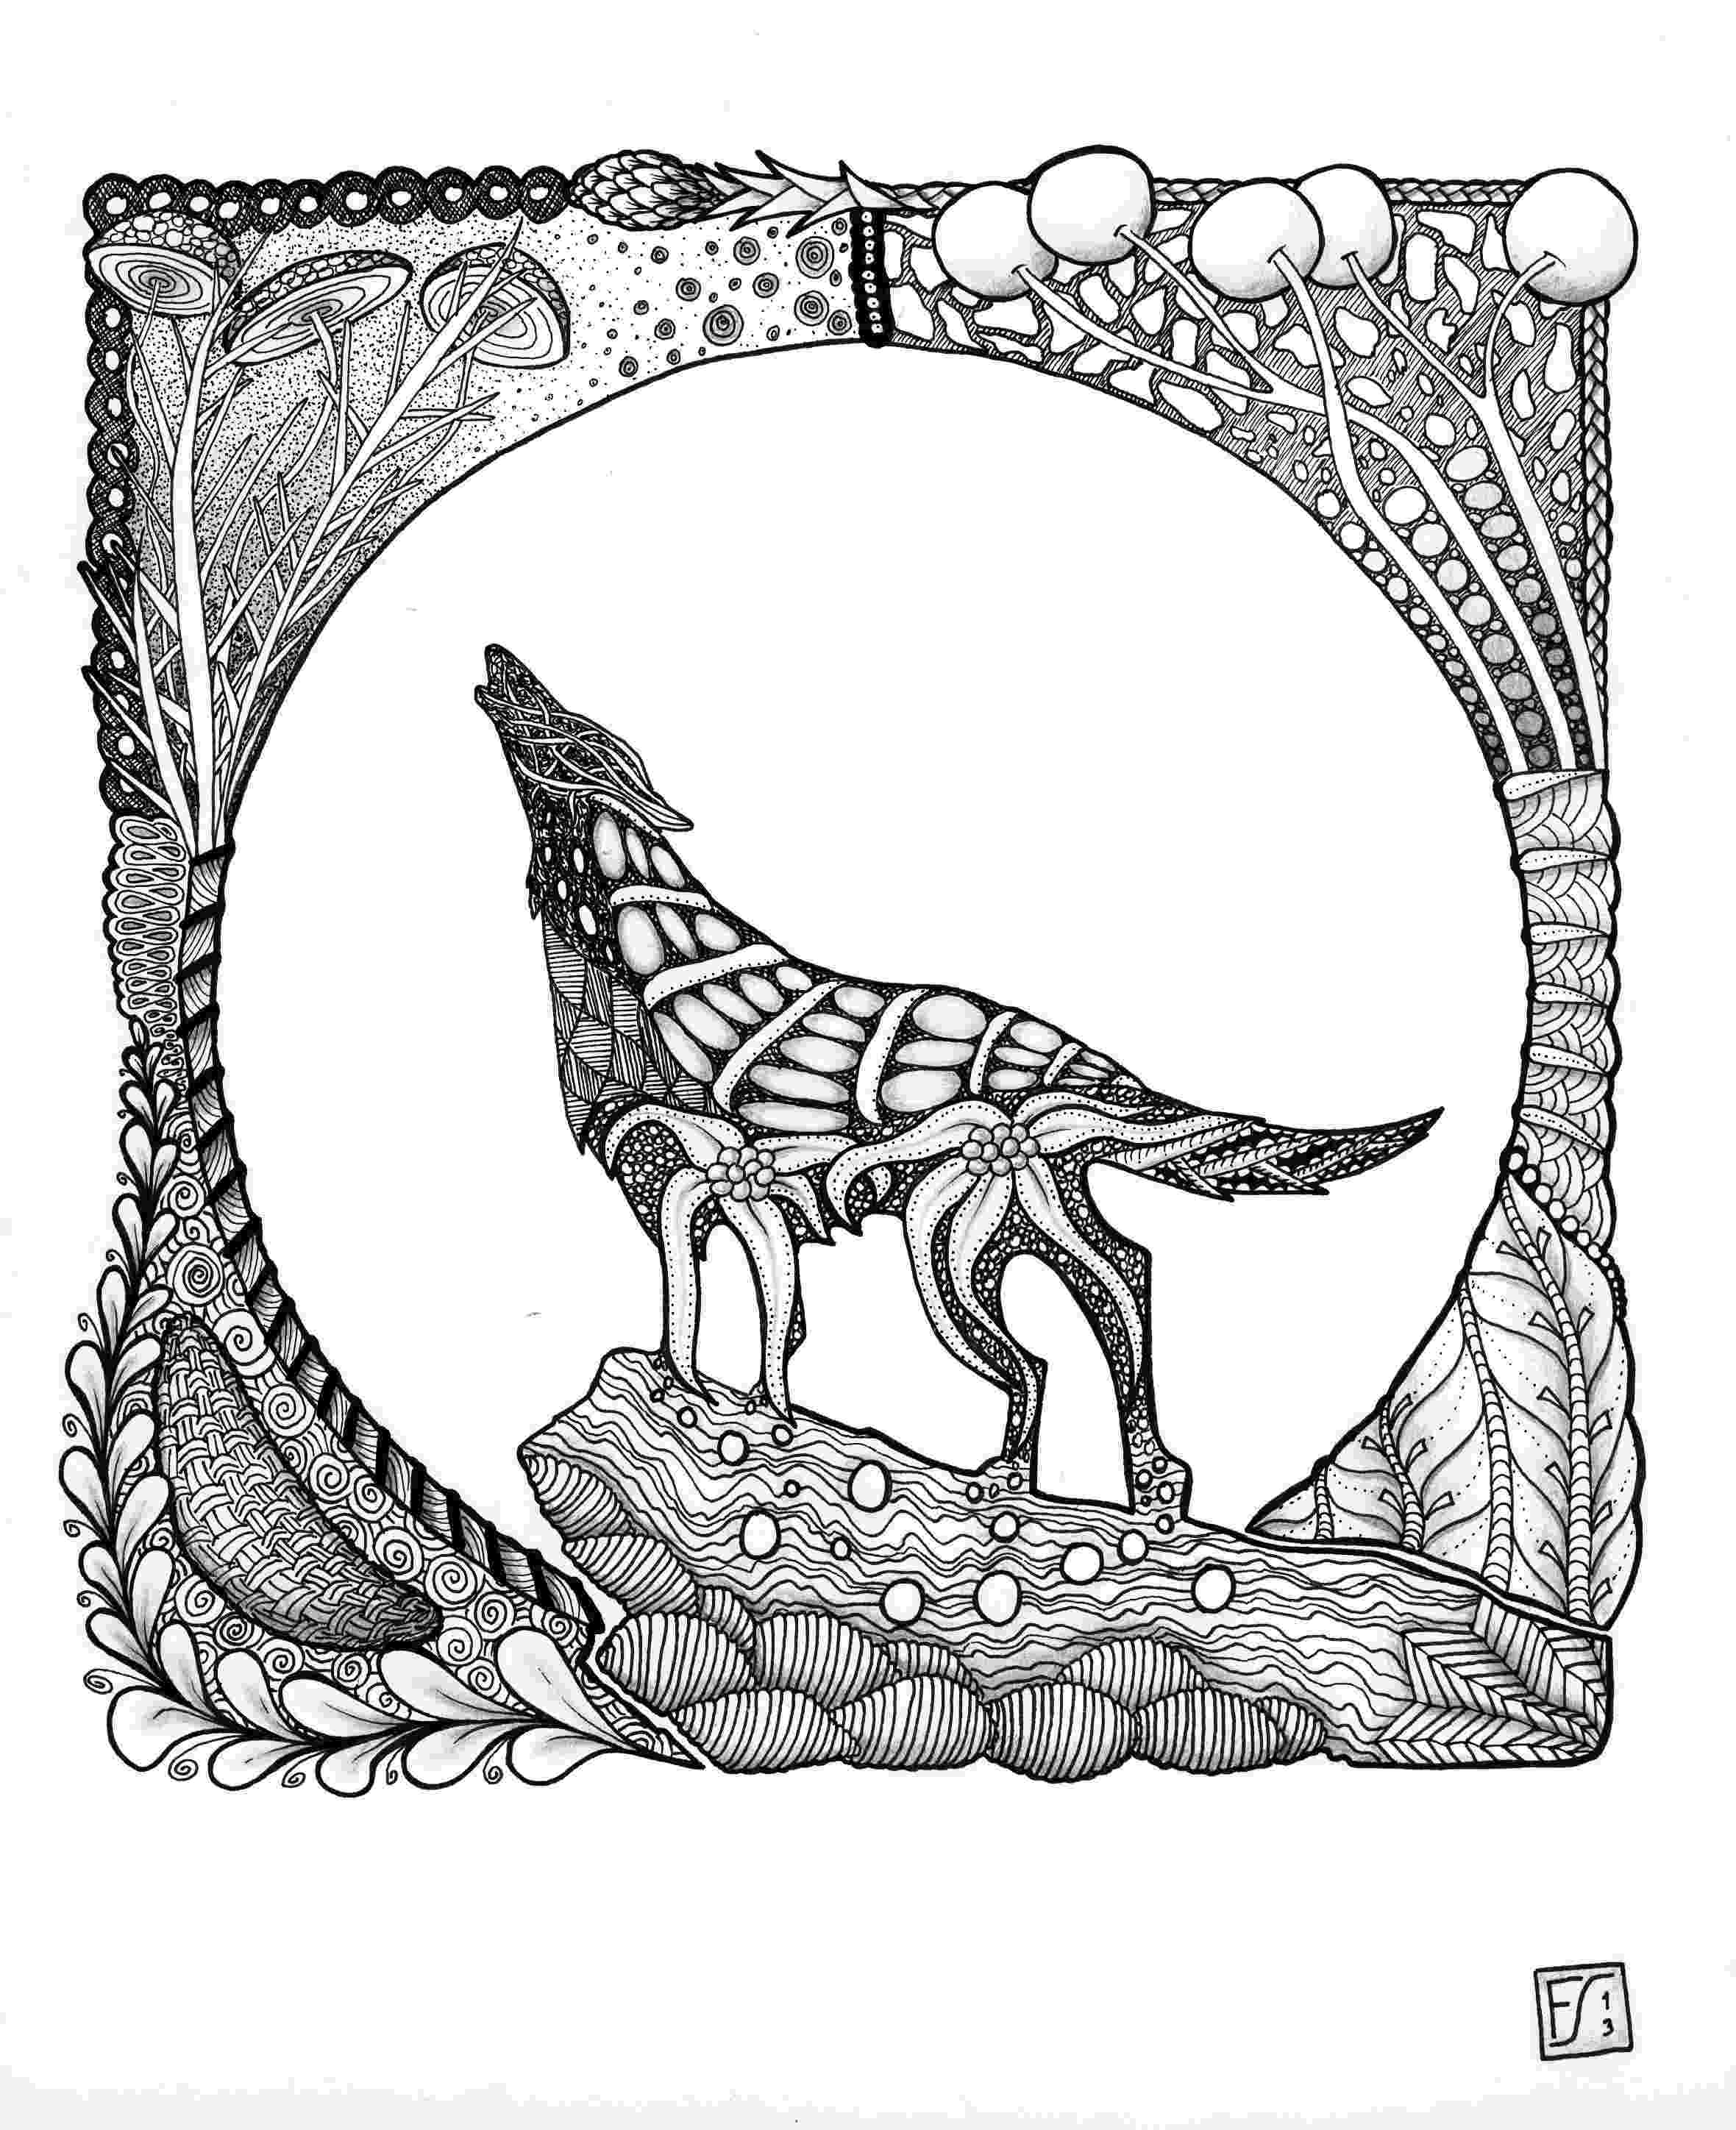 zentangle colouring pages animals zentangle horse by evaclifton on deviantart zen tangled zentangle animals pages colouring 